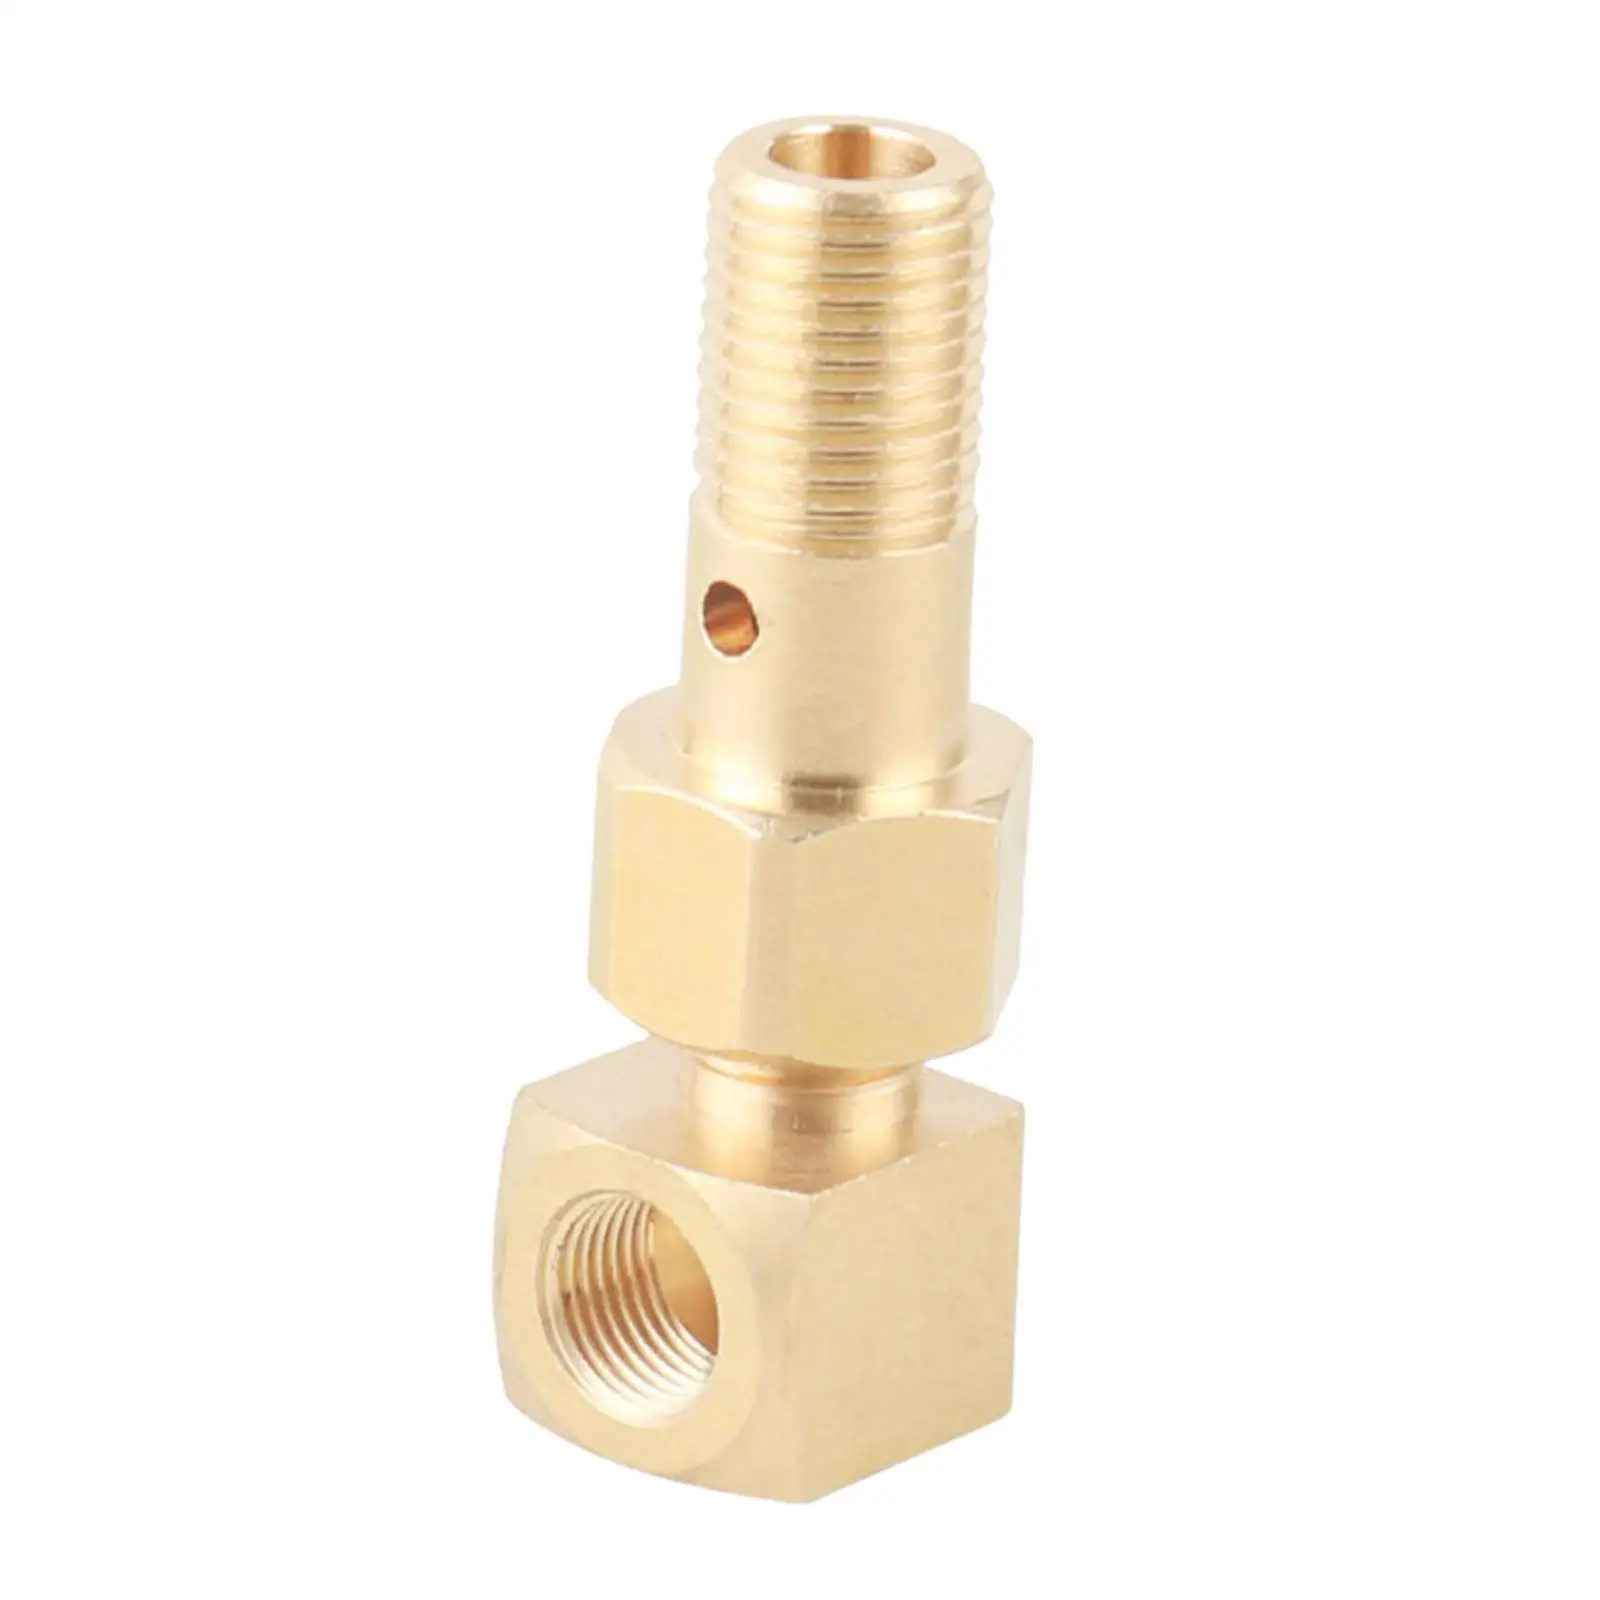 M12 x 1.25 to 1/8-27 NPT Fittings Tool Heavy Duty Accessory Fuel Pressure Banjo Bolt Thread Adapter for Del Sol 93-97